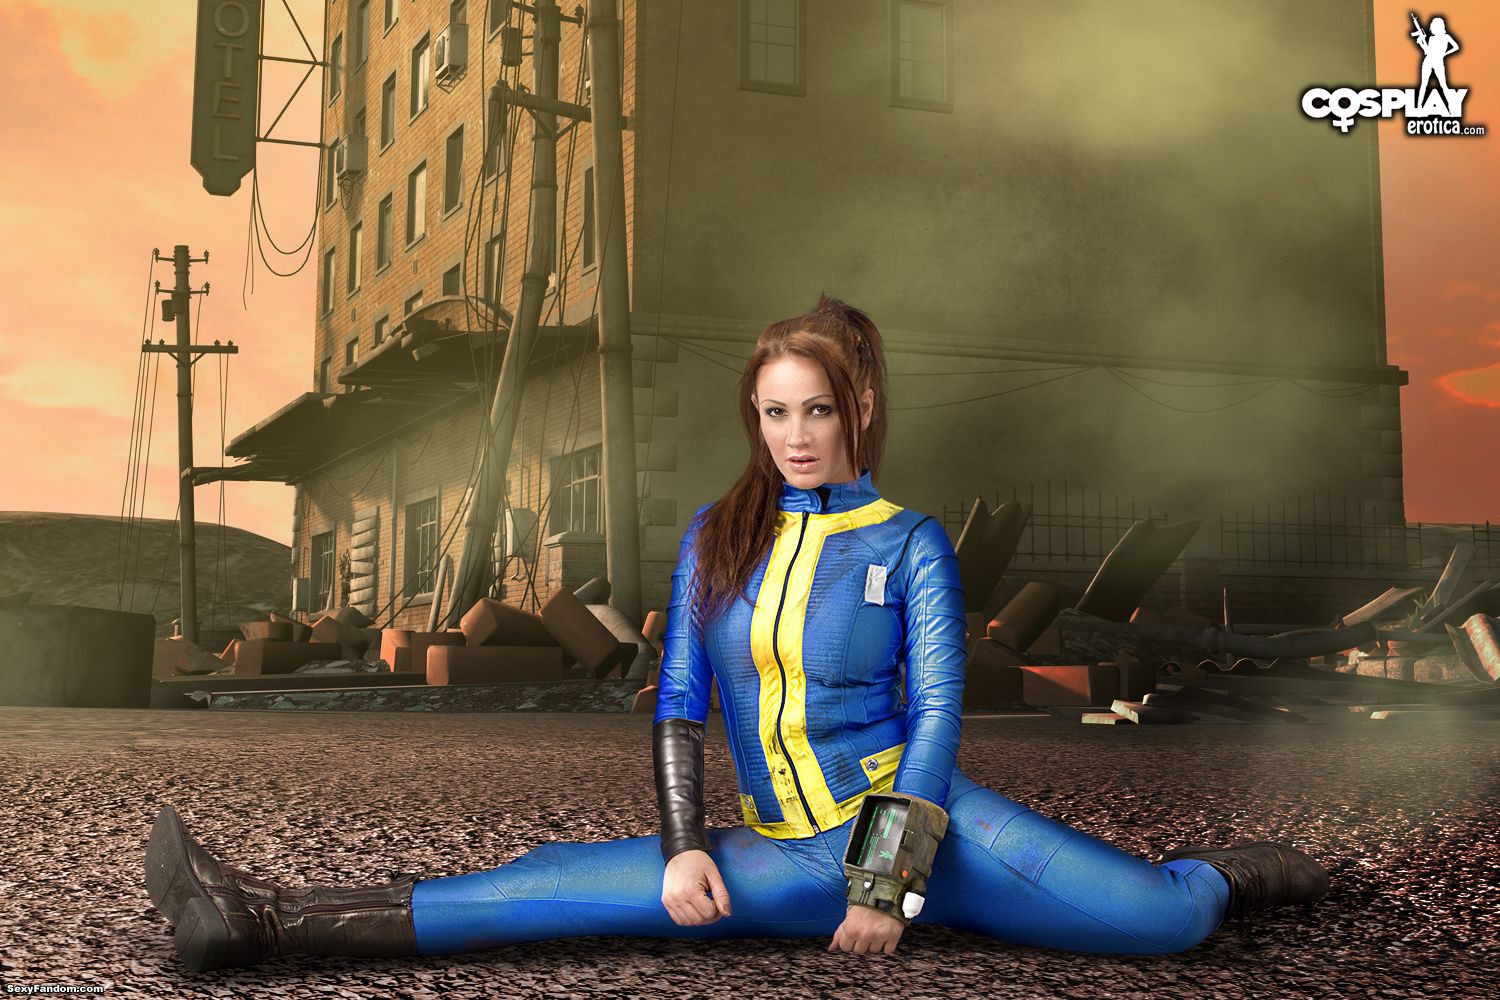 Gogo Survives With Hotness In Fallout Cosplay. commonwealth. cosplay. costu...